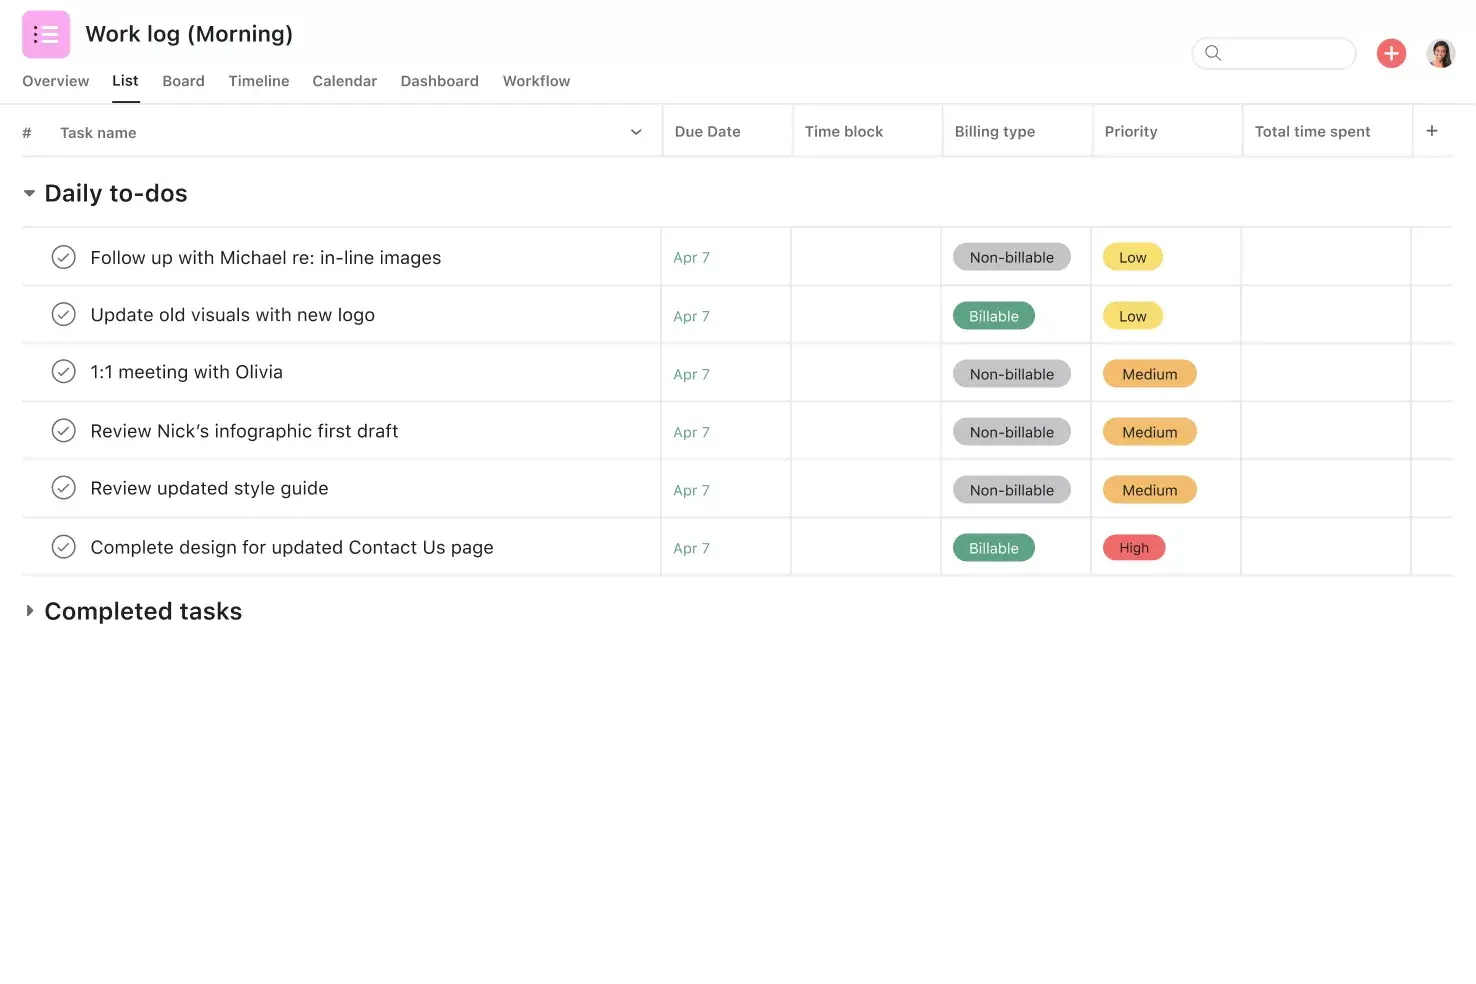 [Product ui] Incomplete work log template in Asana (list view)